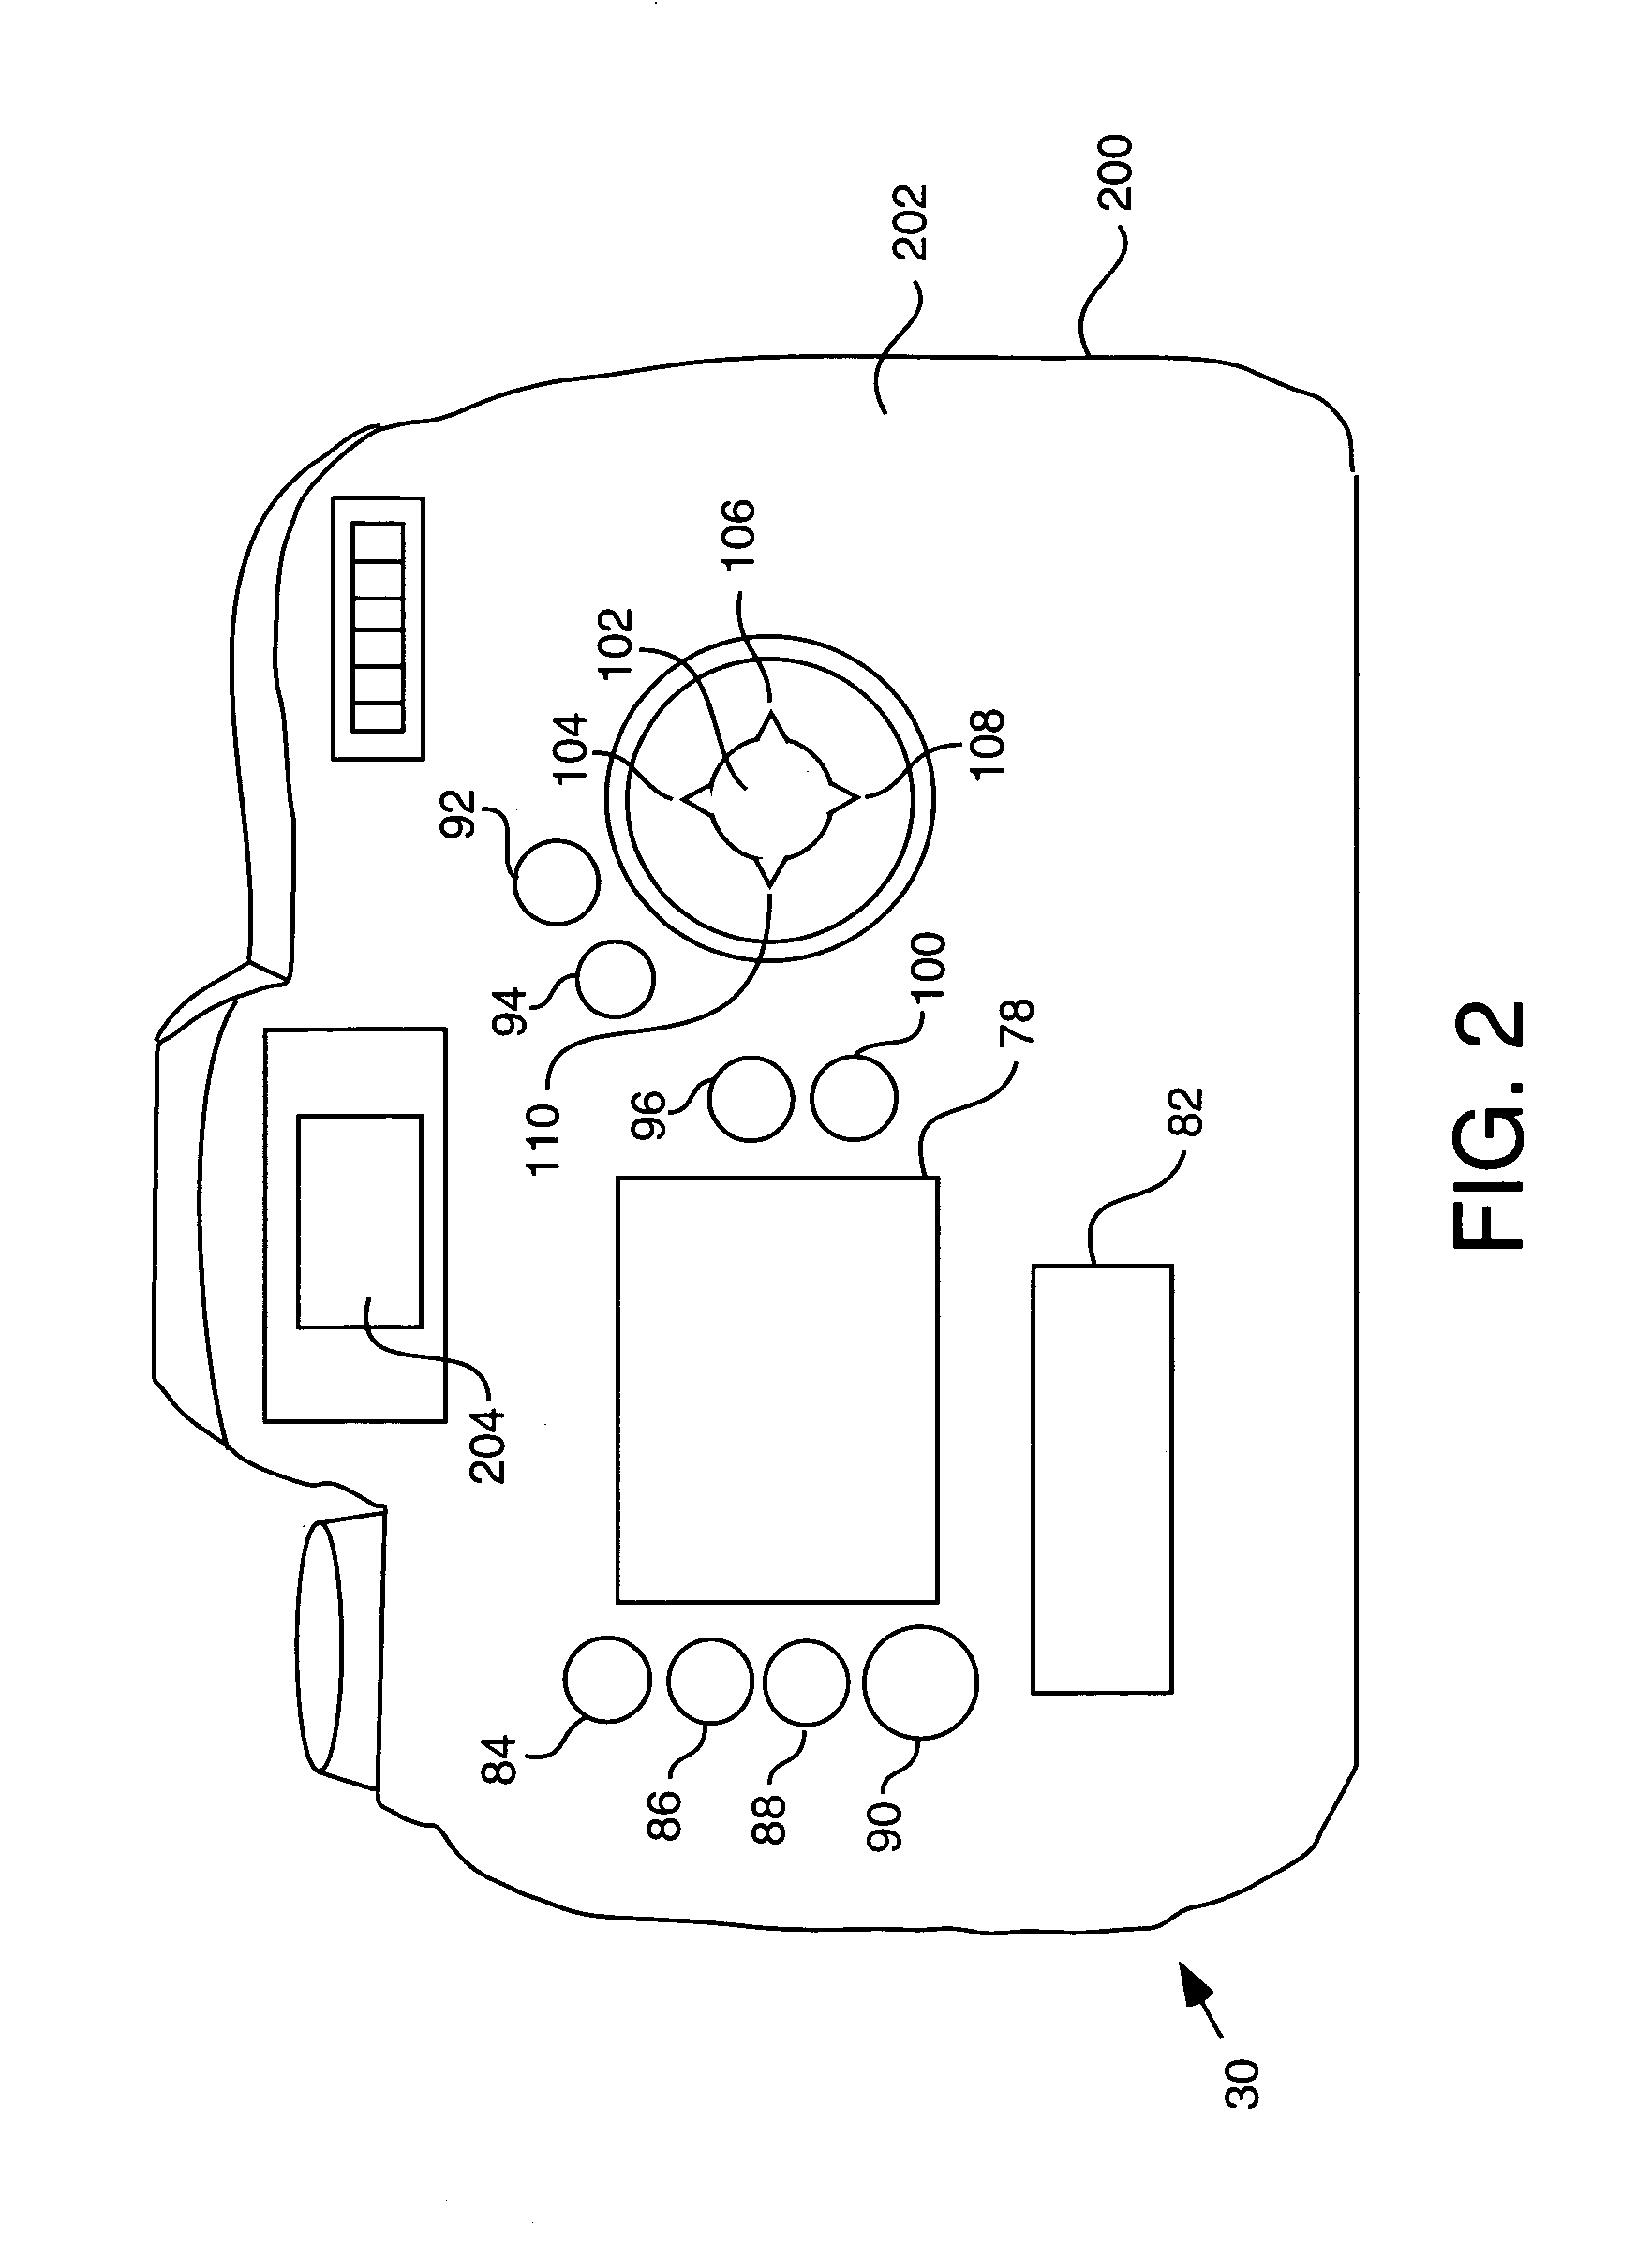 Mutual display support for a digital information/imaging system